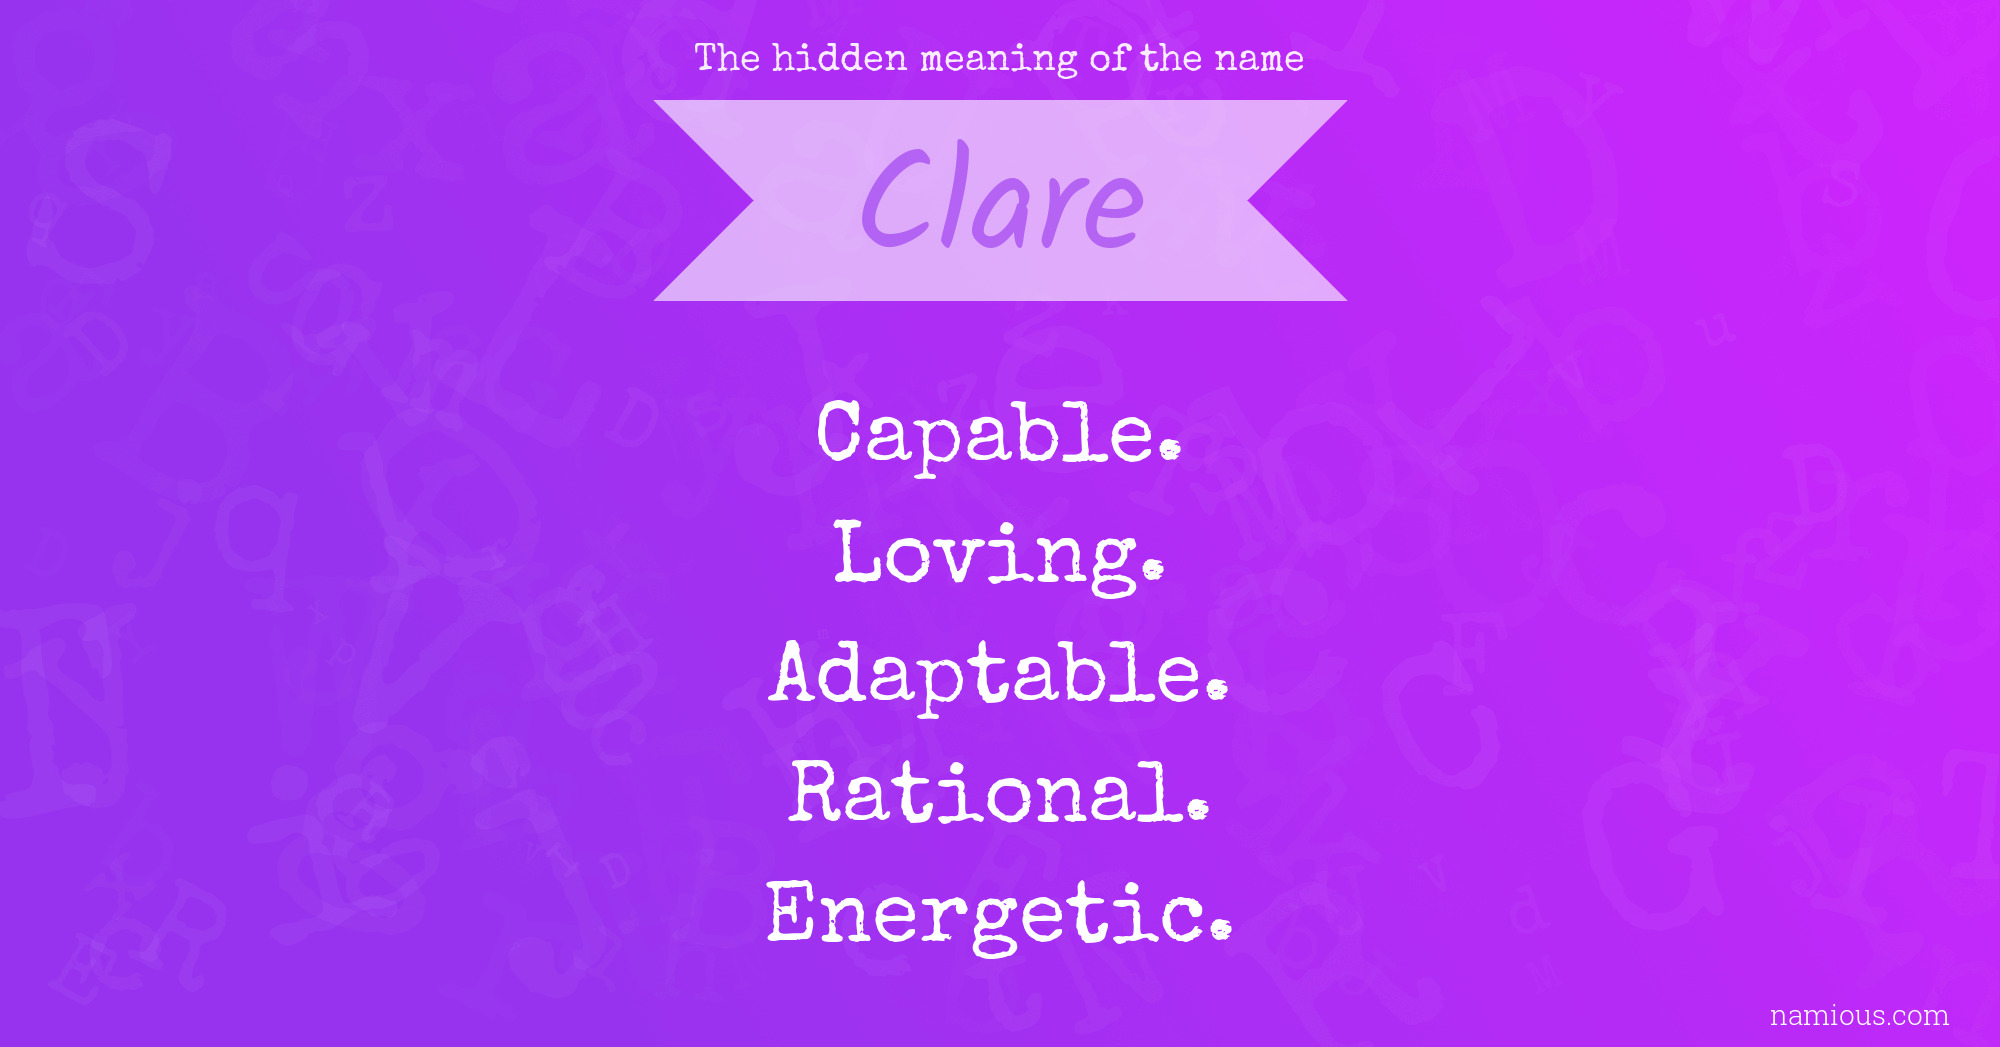 The hidden meaning of the name Clare